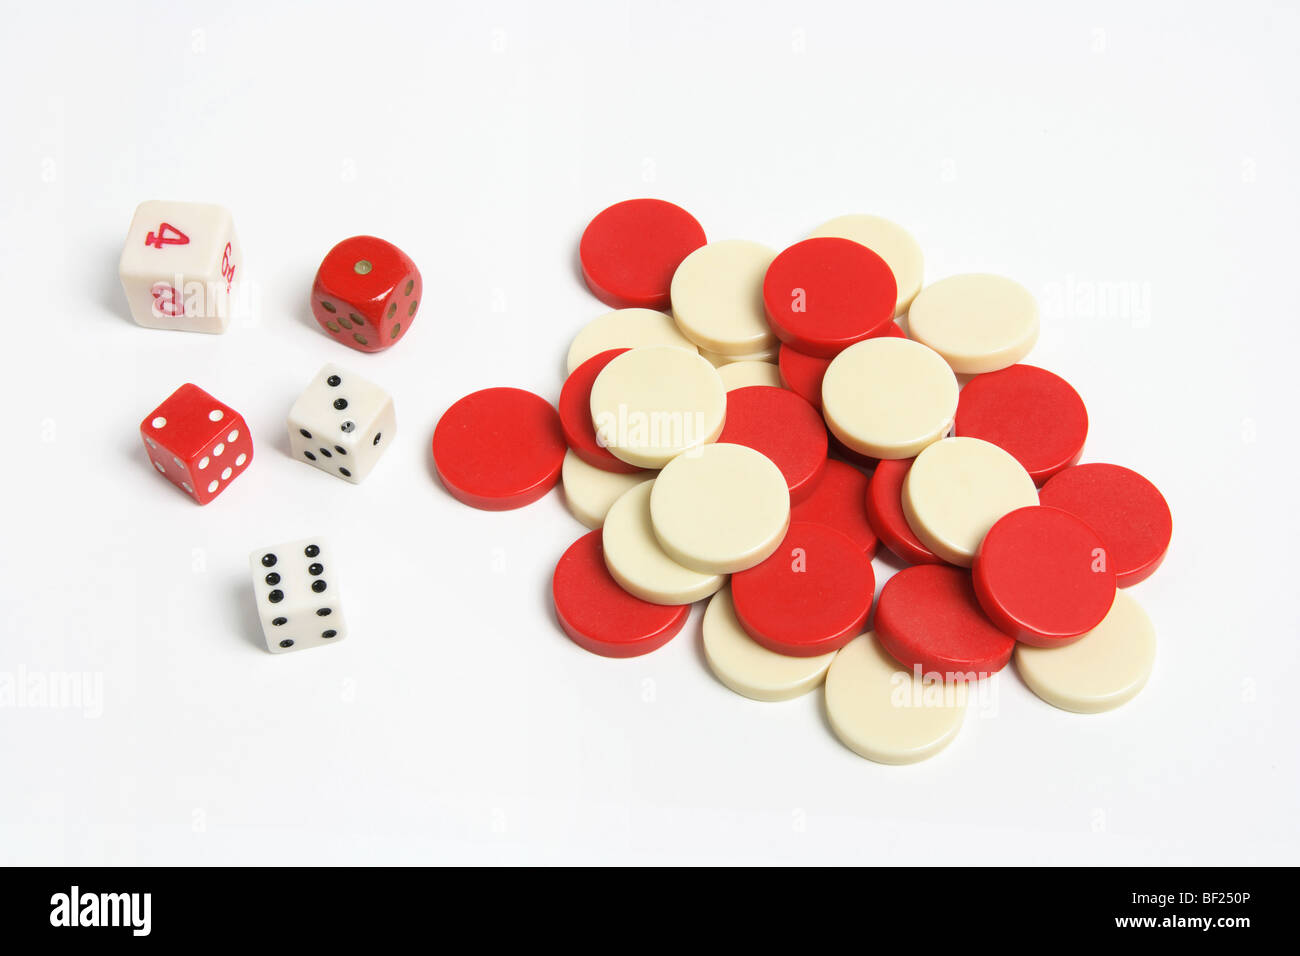 Dice and Checkers Stock Photo